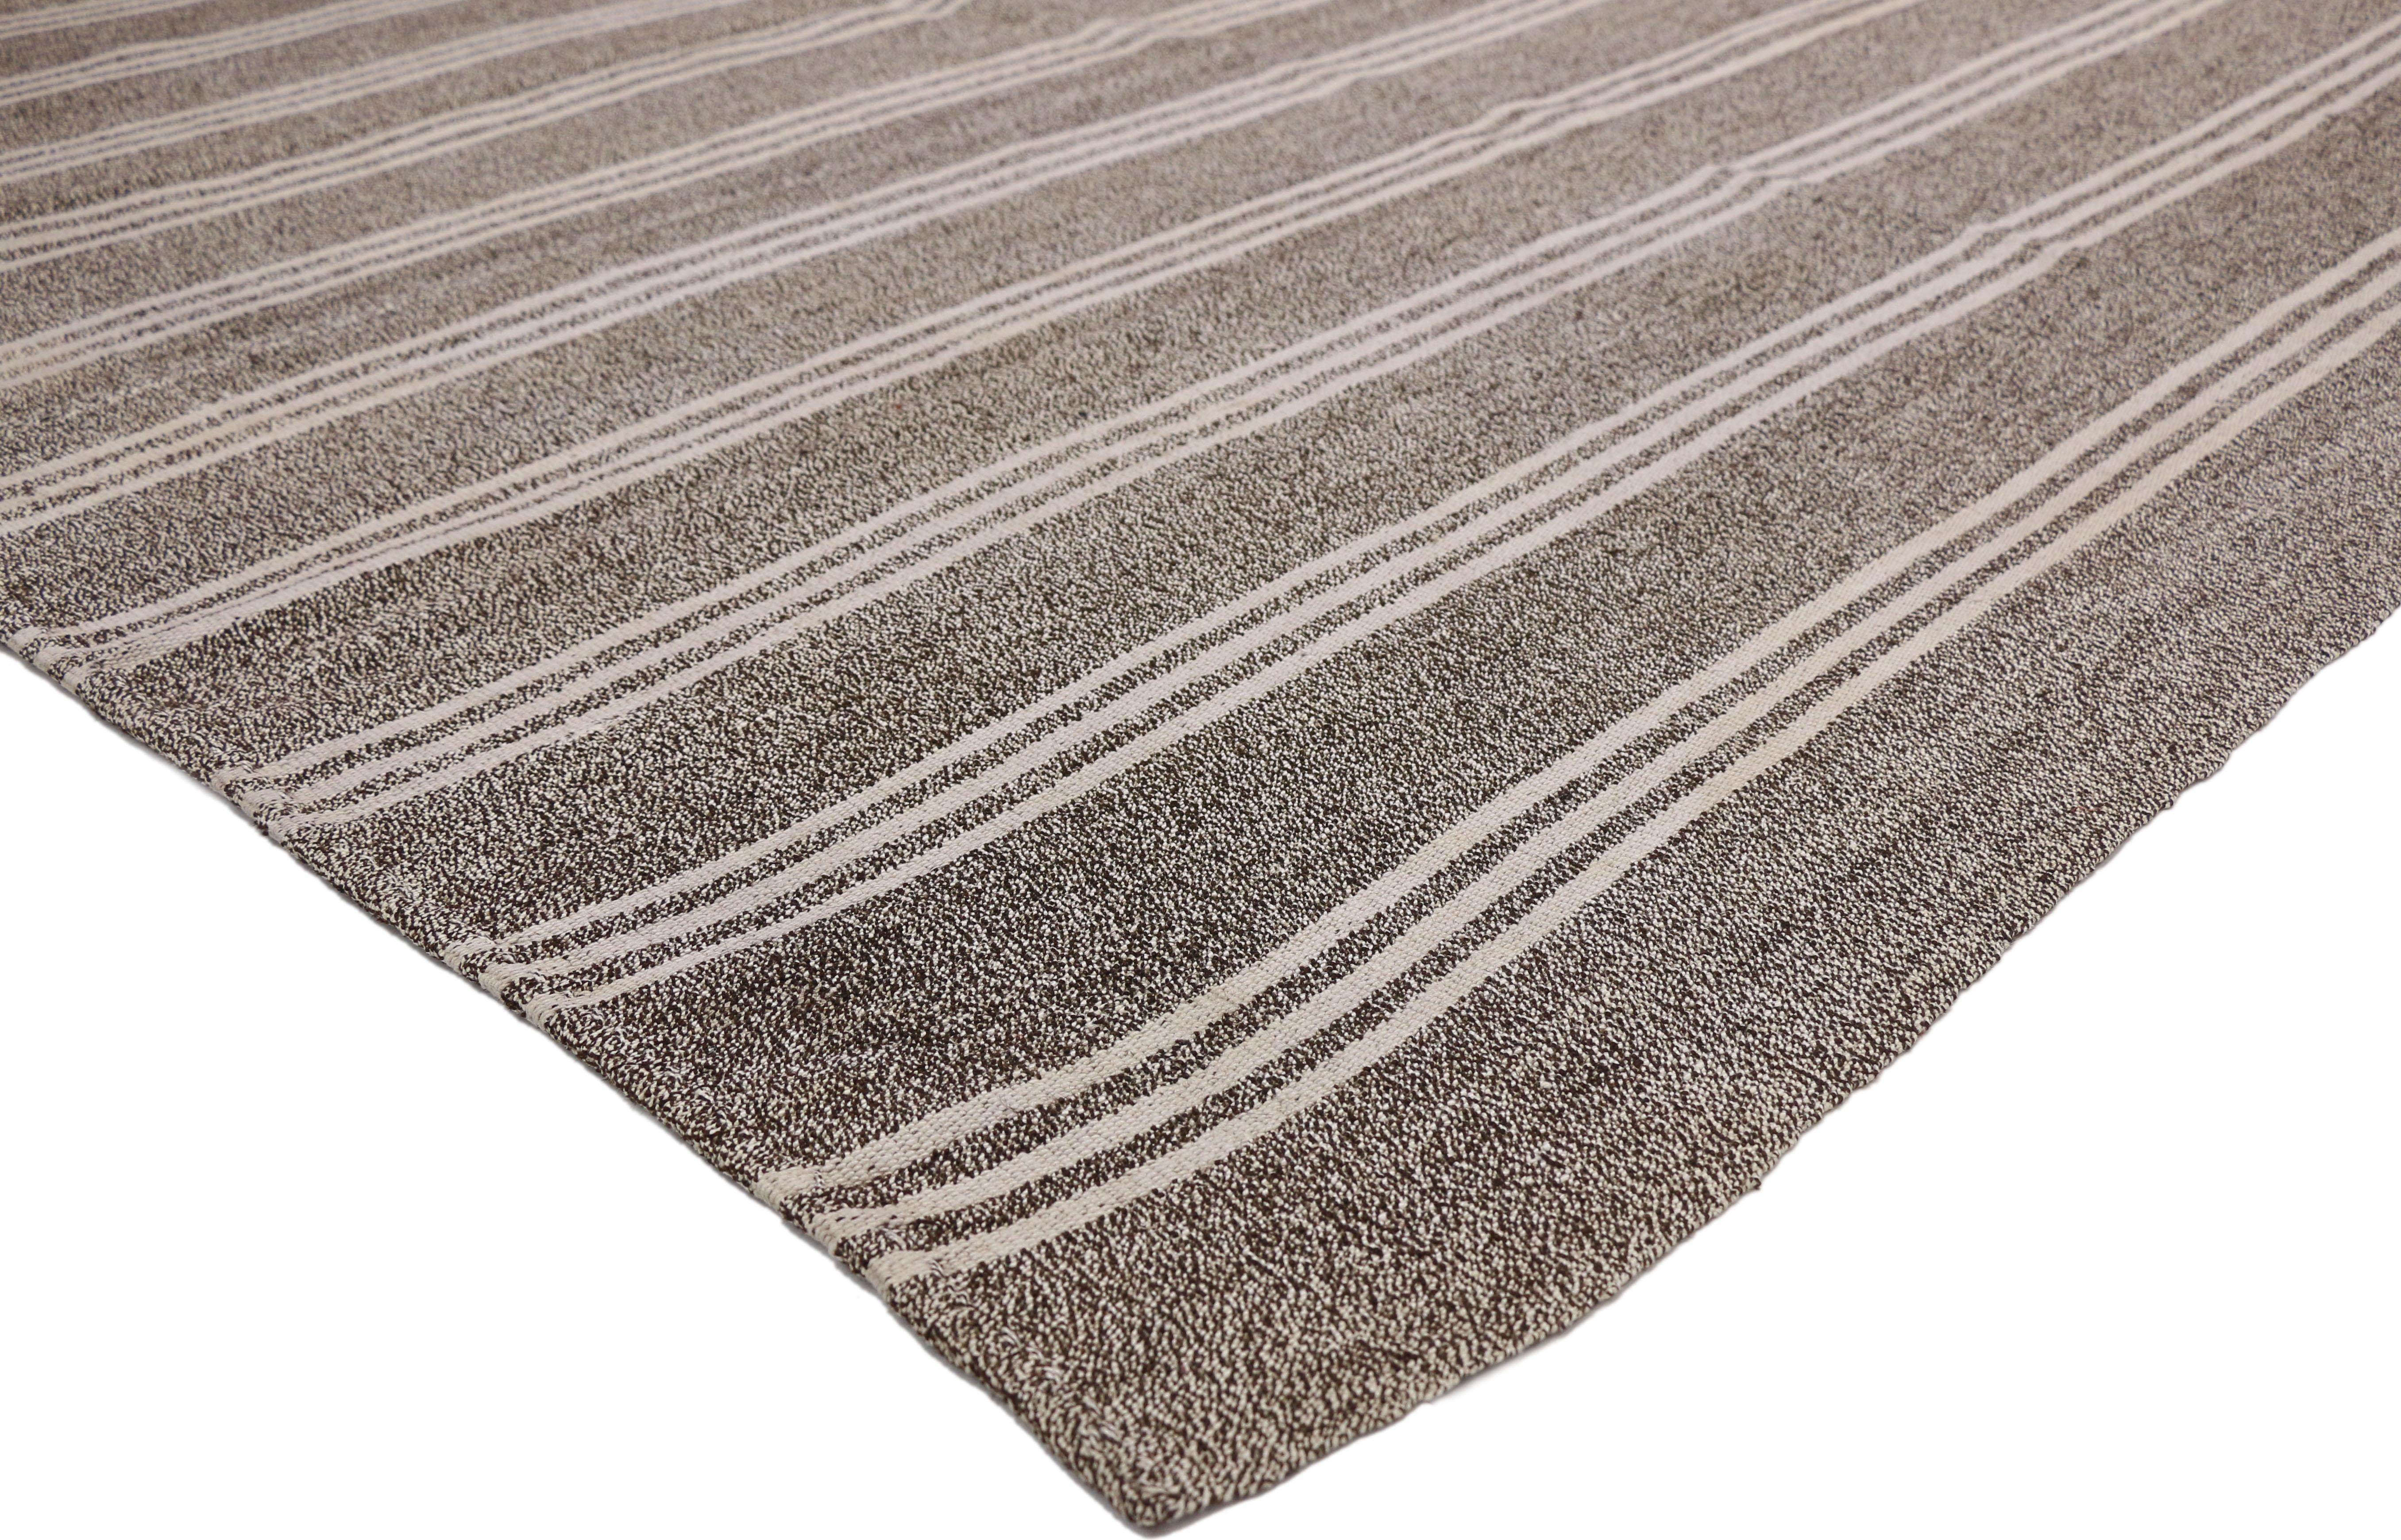 50885 vintage Turkish striped Kilim area rug with Modern Industrial. This vintage striped Kilim area rug features a series of triple bands running the length of the carpet. This vintage Turkish Kilim rug is a beautiful marriage of modern Industrial